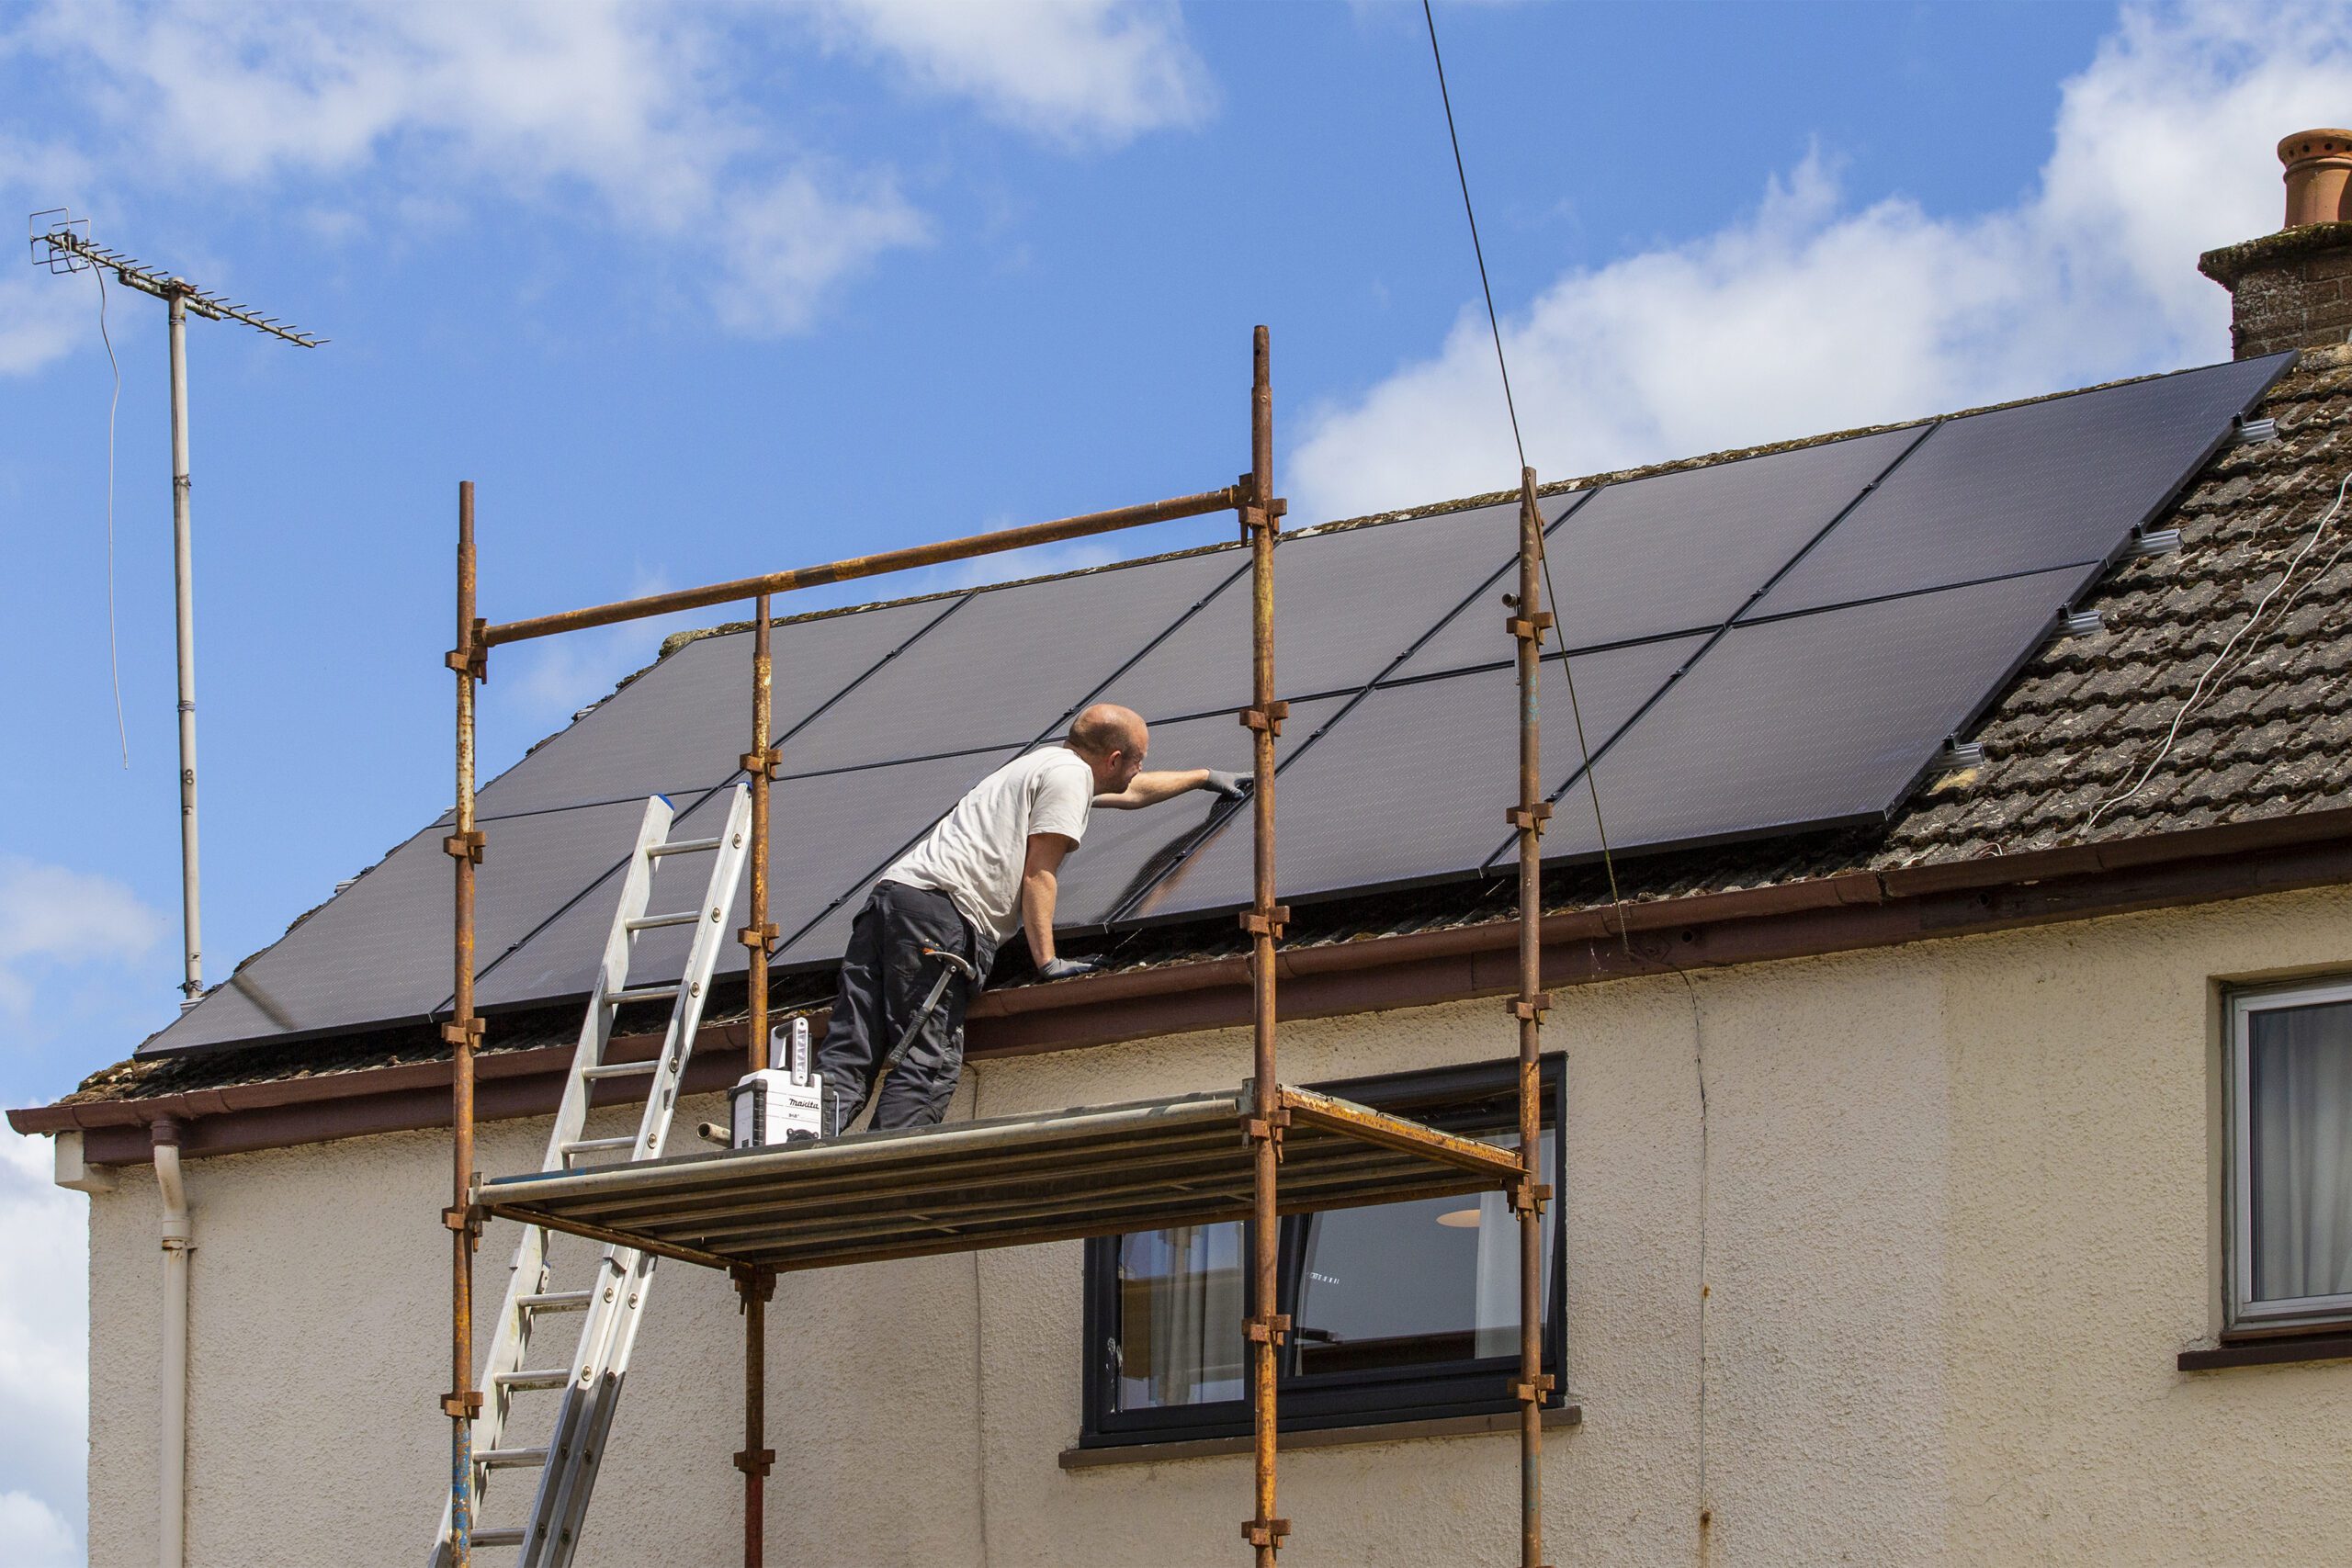 Man stands on scaffolding installing solar panels on a roof.